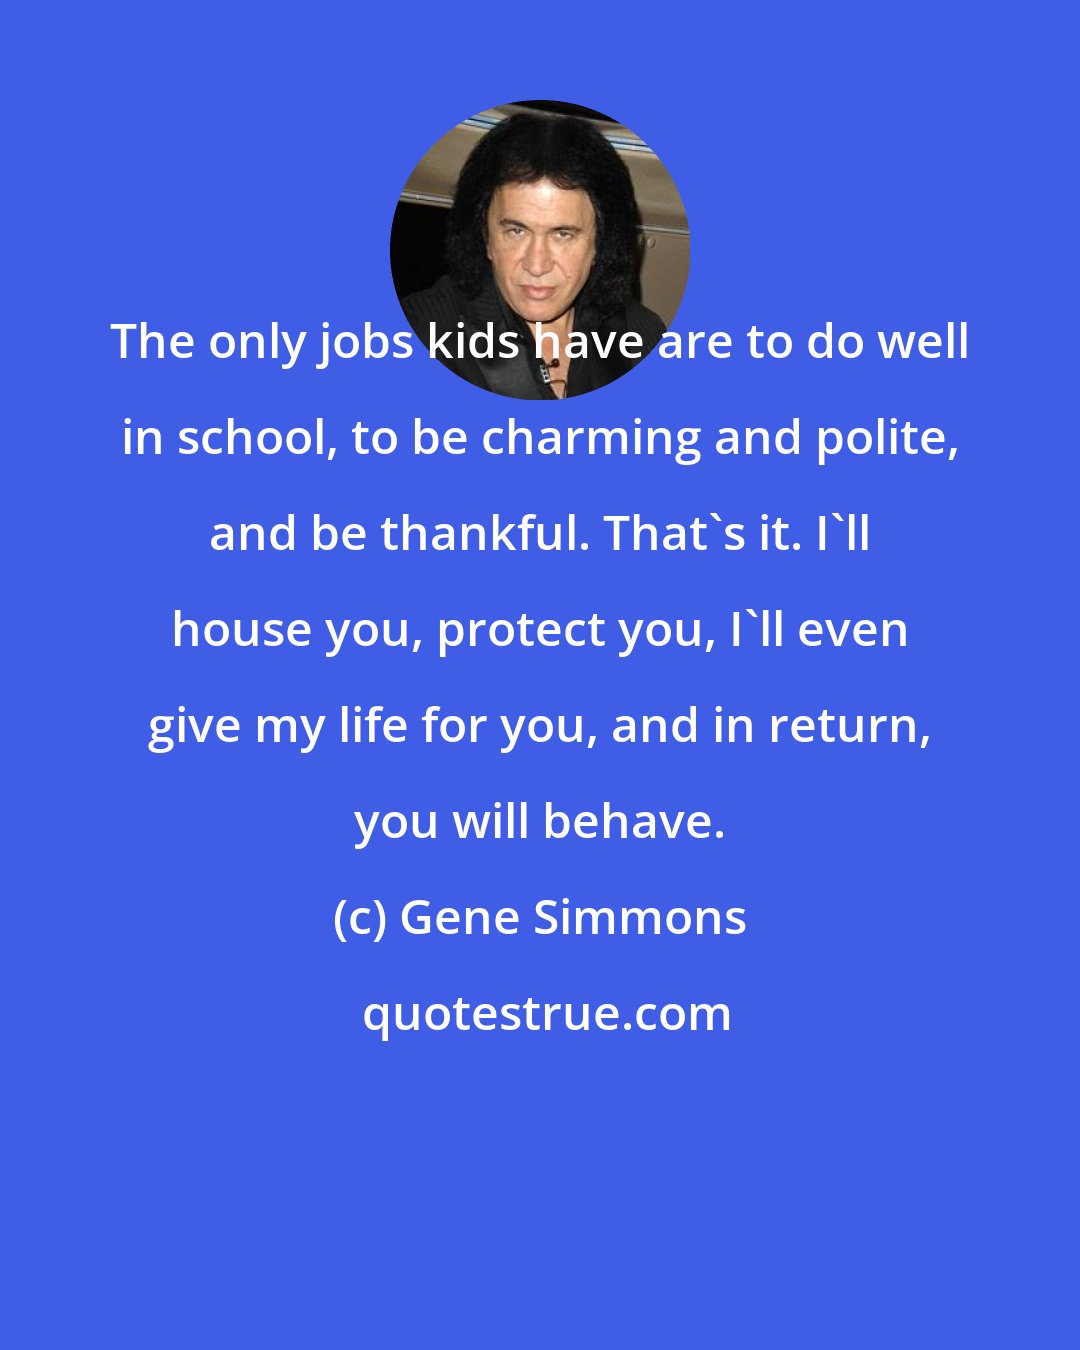 Gene Simmons: The only jobs kids have are to do well in school, to be charming and polite, and be thankful. That's it. I'll house you, protect you, I'll even give my life for you, and in return, you will behave.